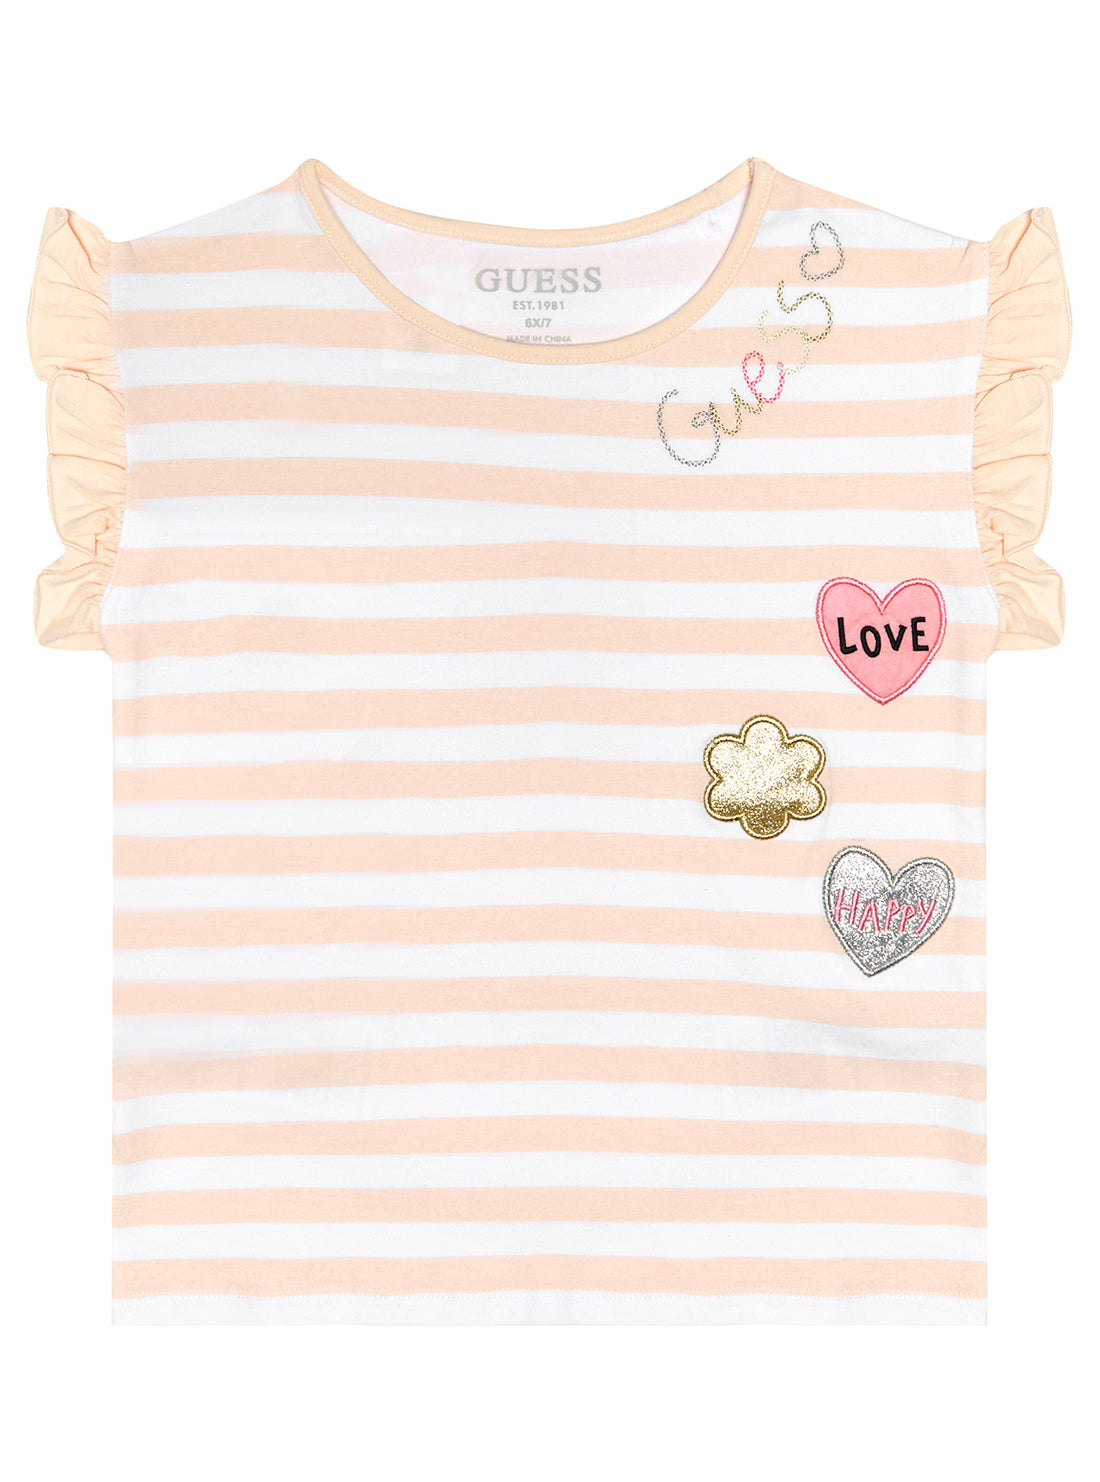 Girl's Light Pink Stripe Love Top (2-7) | GUESS Kids | Front view